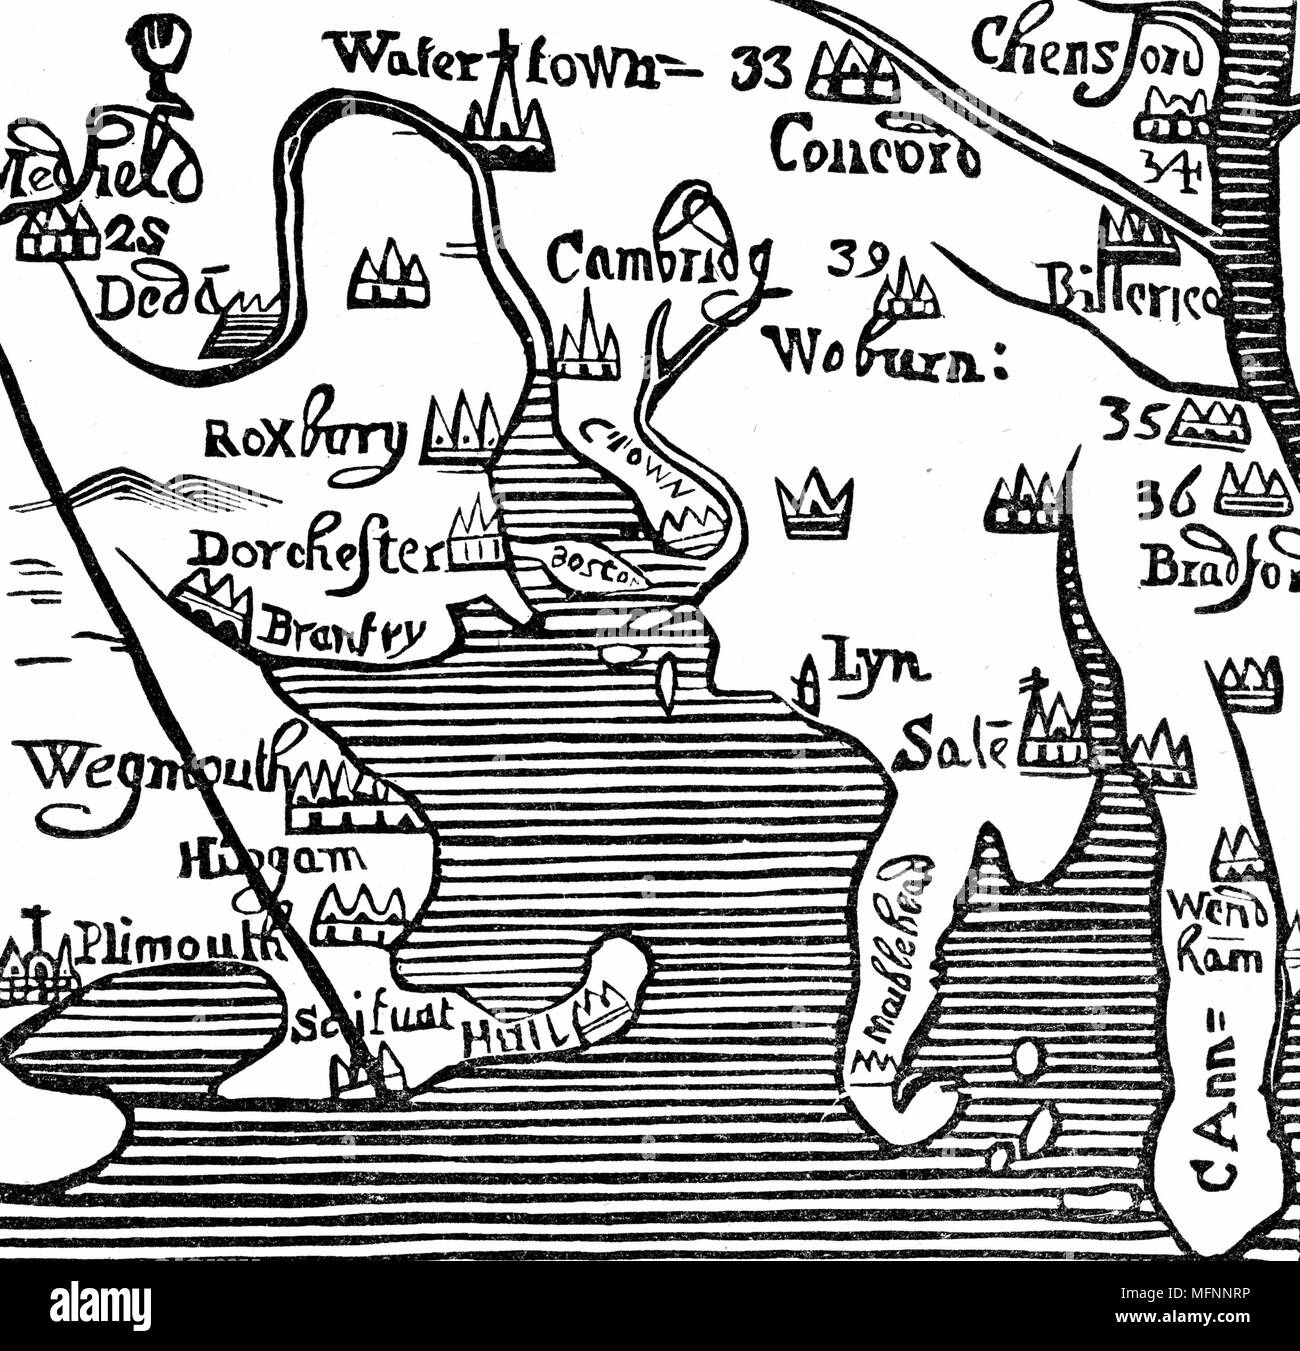 Early map of Massachusetts Bay, America. Massachusetts was first settled by the Pilgrim Fathers, the Puritans who escaped religious persecution in England and sailed to America from Plymouth, England, via Leyden in the Netherlands, in 1620. Woodcut. Stock Photo